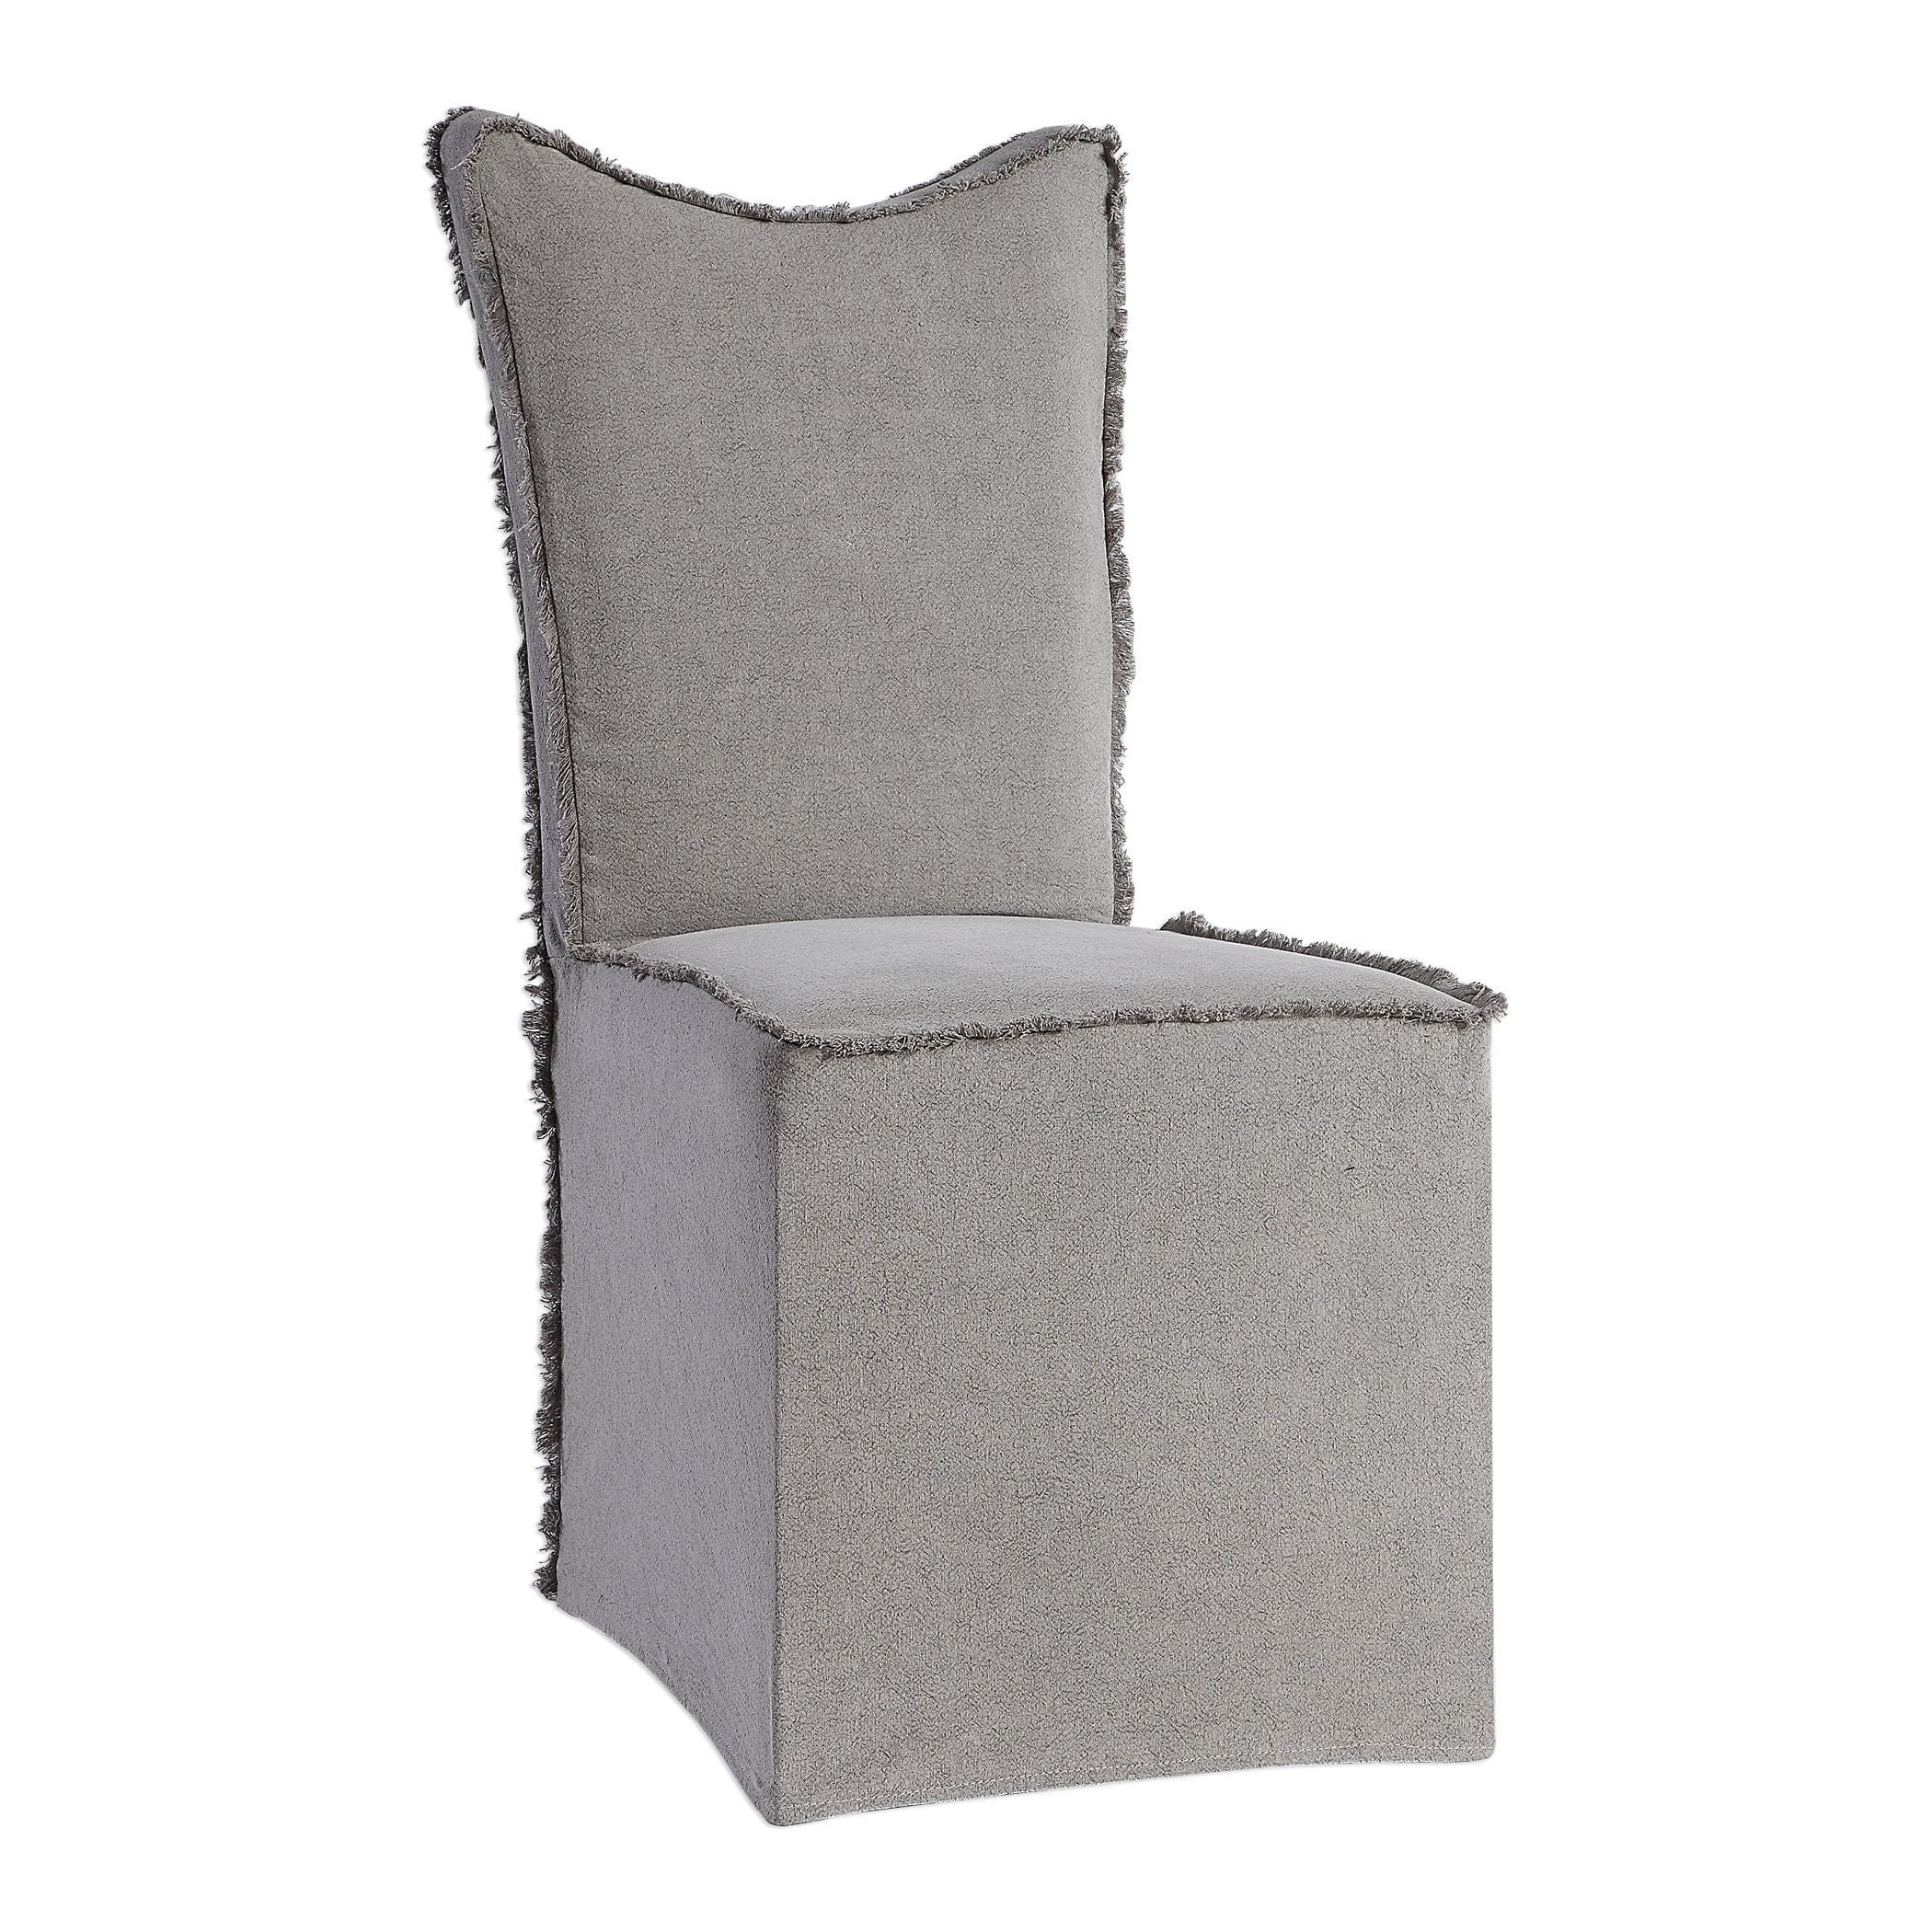 Narissa Armless Chairs (S/2) Uttermost